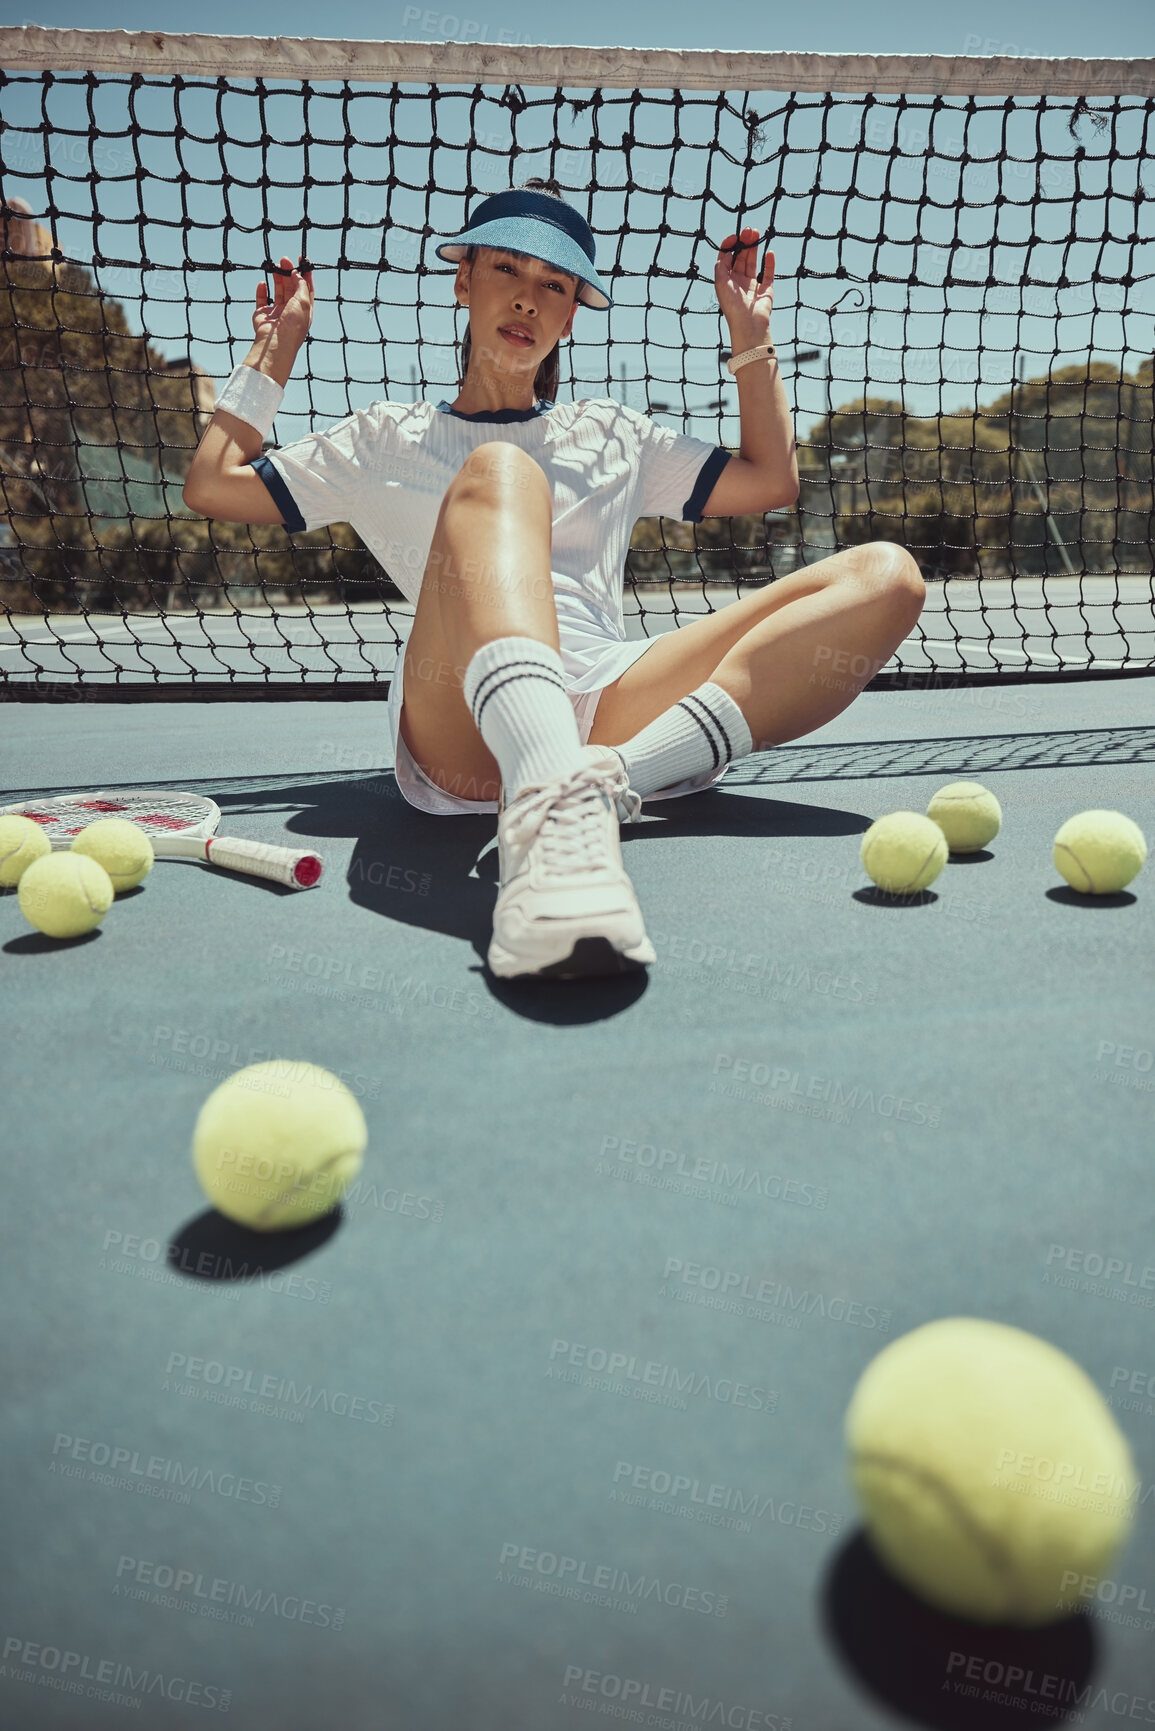 Buy stock photo Relax, portrait and tennis woman at net on exercise, fitness and court break at sports ground. Training, workout and cardio of professional athlete club girl resting on floor with tennis balls.
